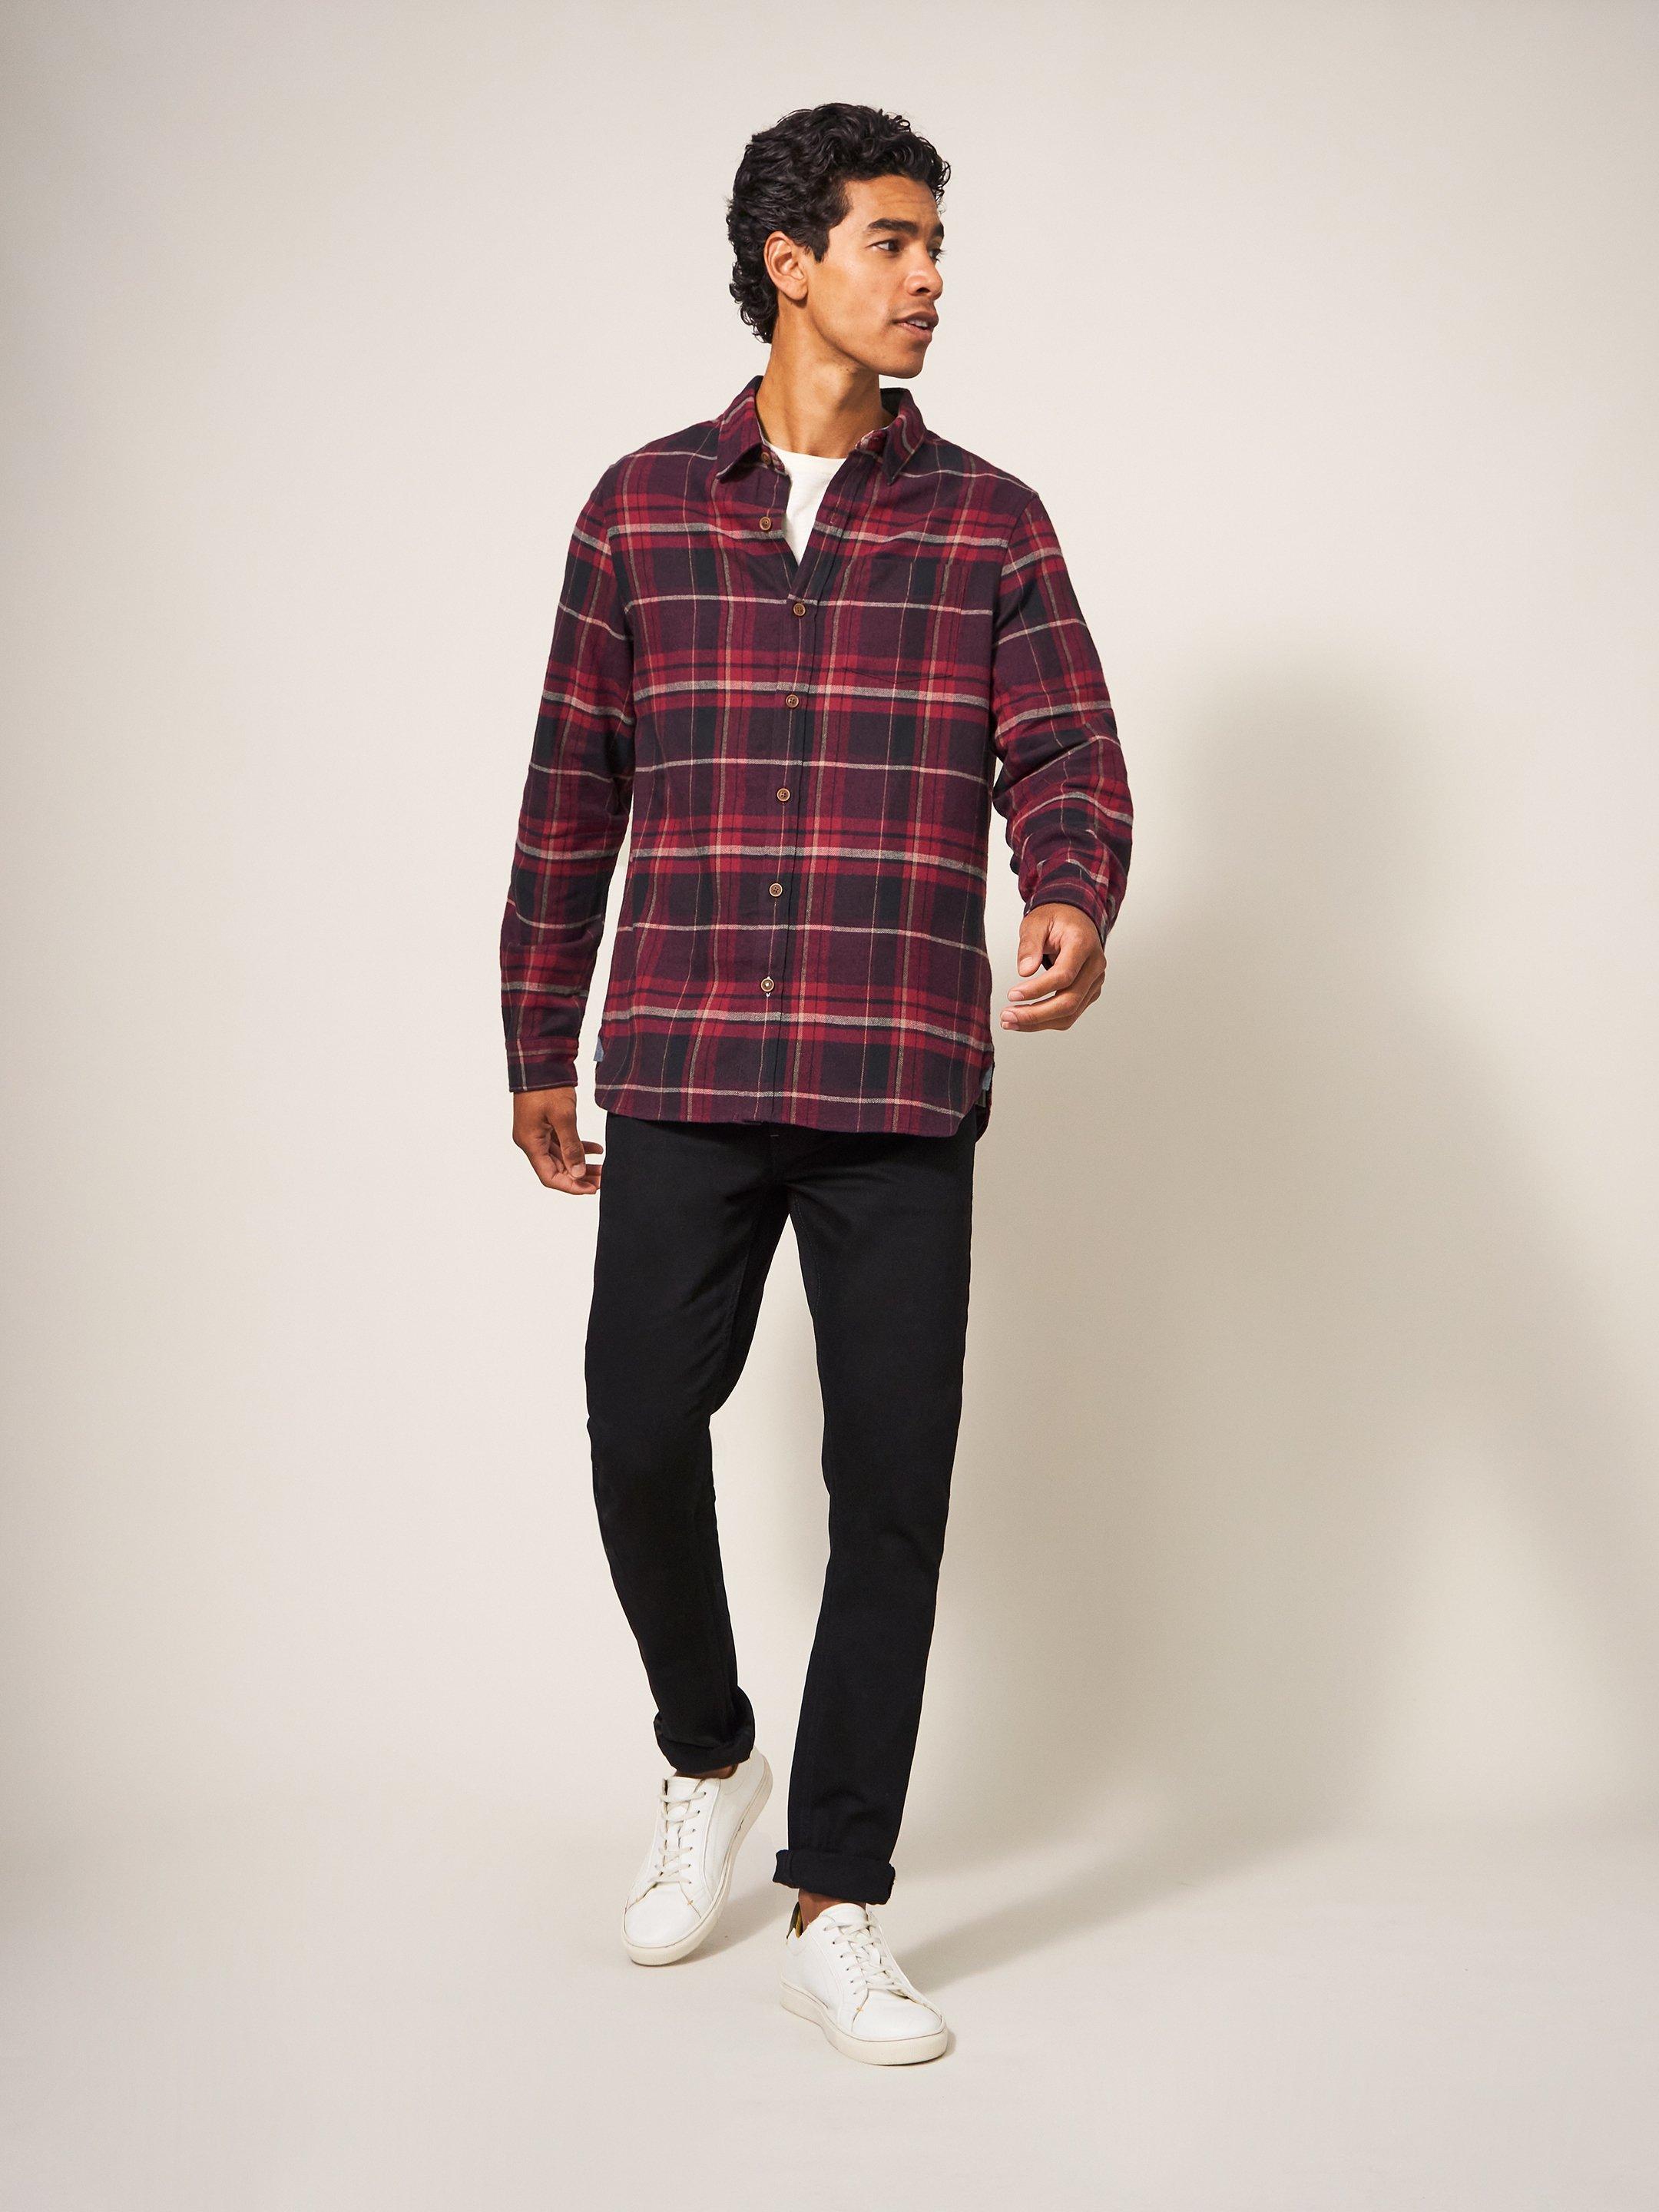 Moxley Brushed Check Shirt in DK RED - MODEL DETAIL